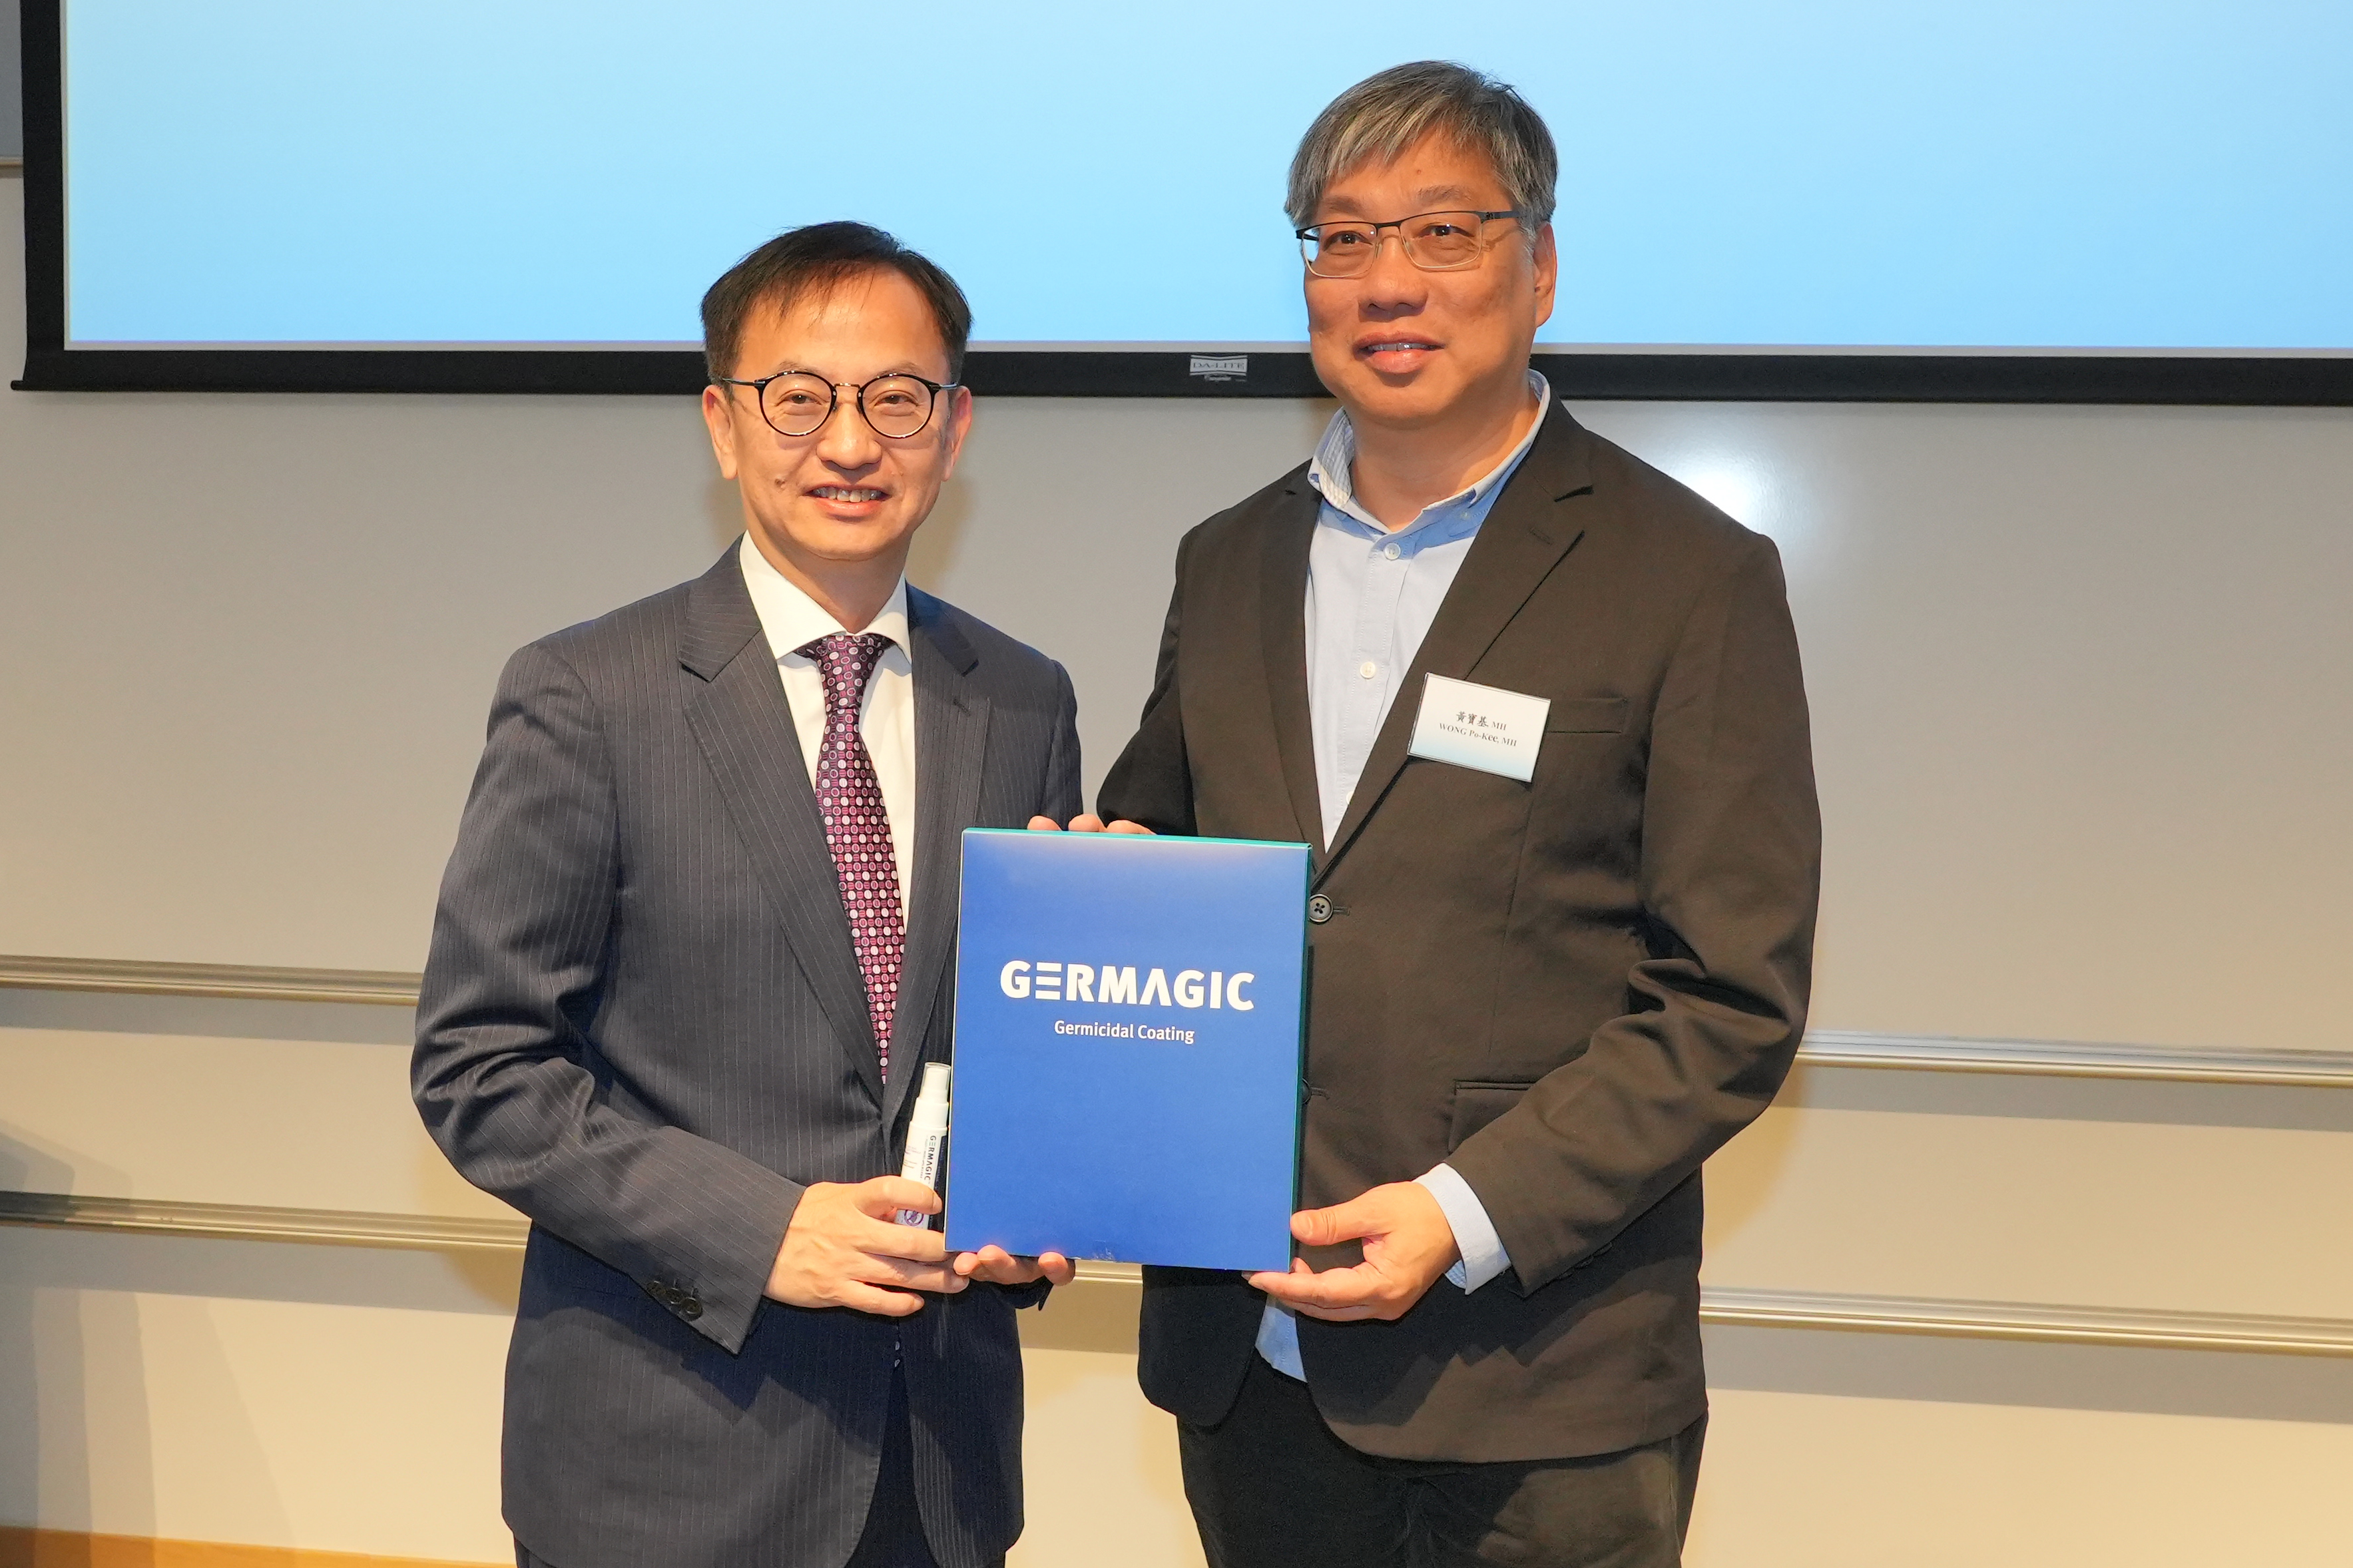 Dr. David CHUNG (left) presents the pest repellent developed by the lab as a souvenir to Mr. WONG Po-Kee, Honorary Deputy Secretary General of the Sports Federation & Olympic Committee of Hong Kong, China (right). 